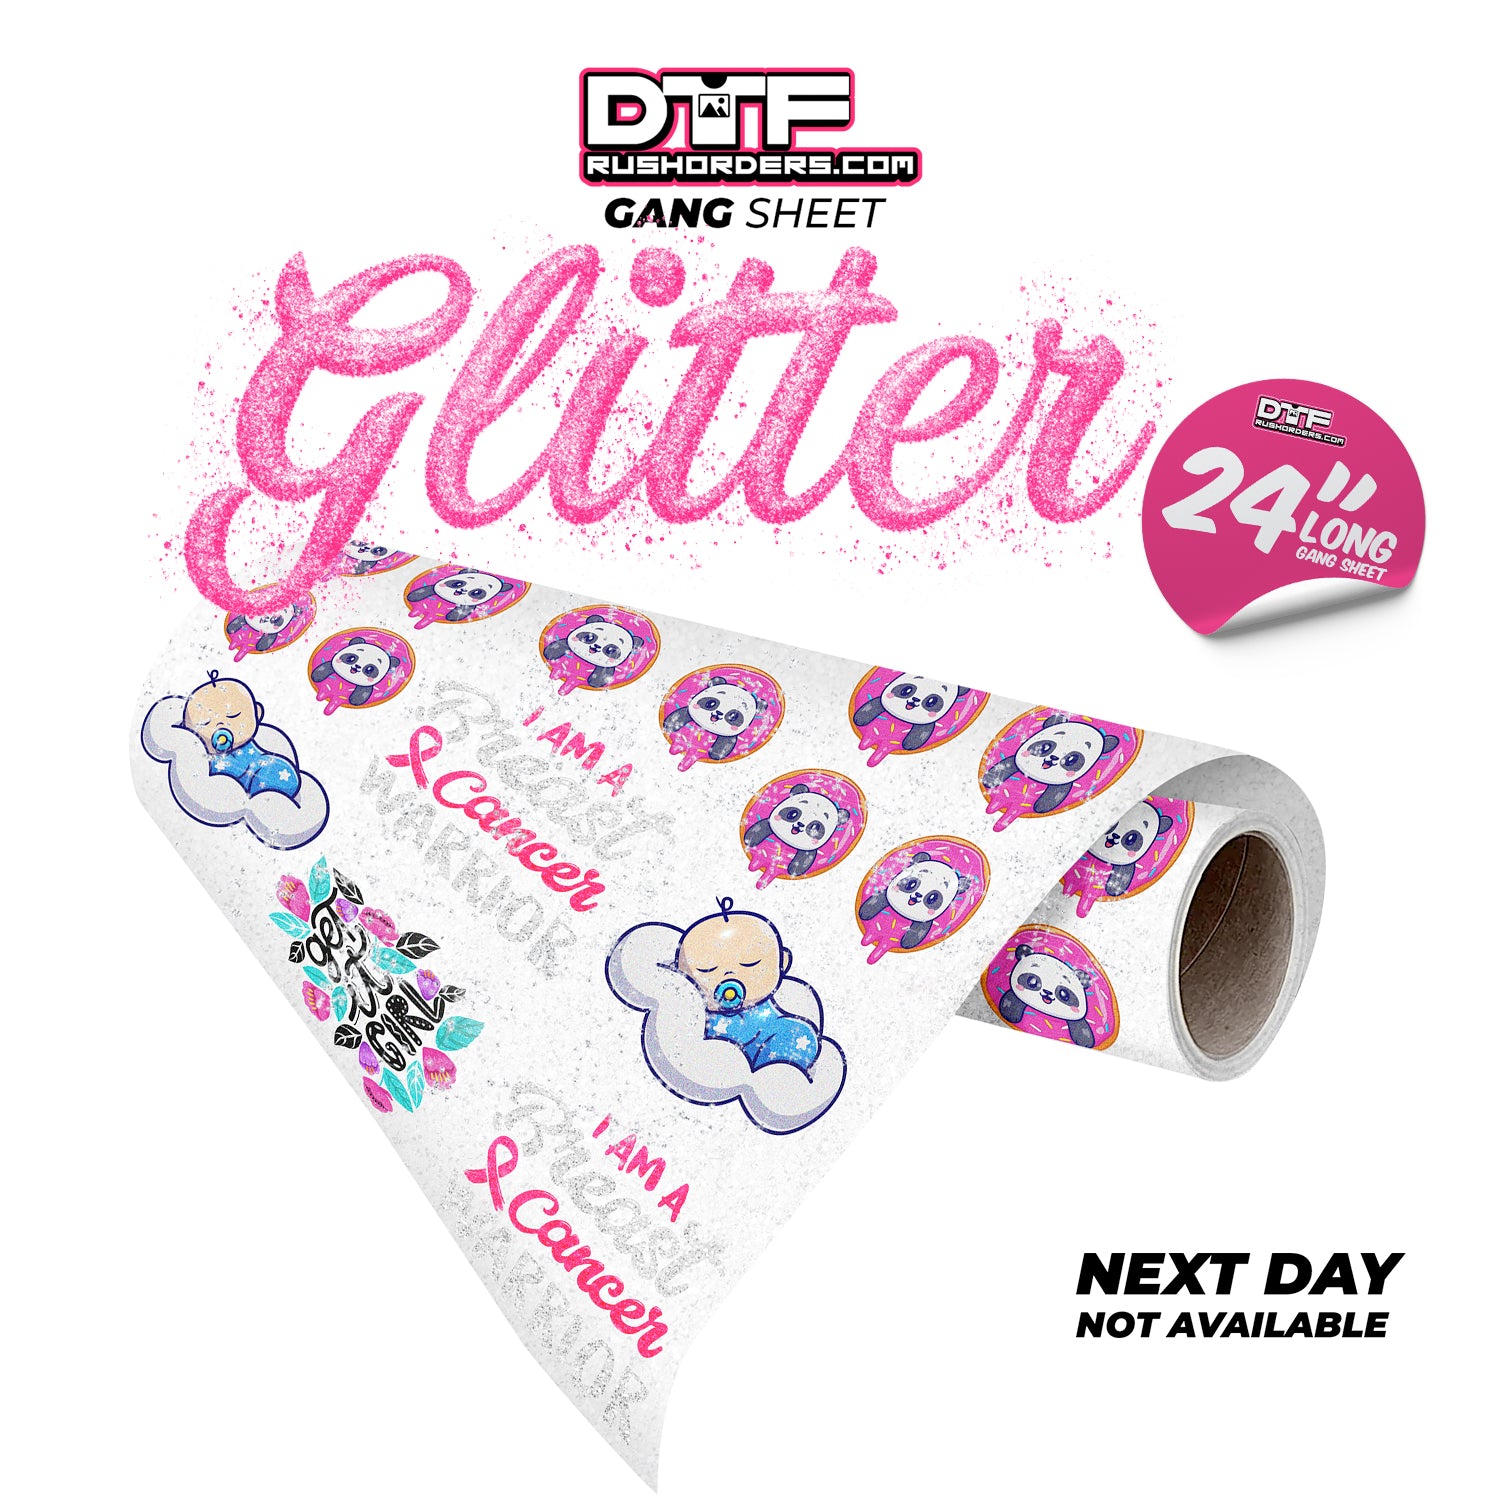 Glitter Transfers - Sparkling, adhesive embellishments perfect for adding a touch of shimmer and glamour to your crafts and projects.